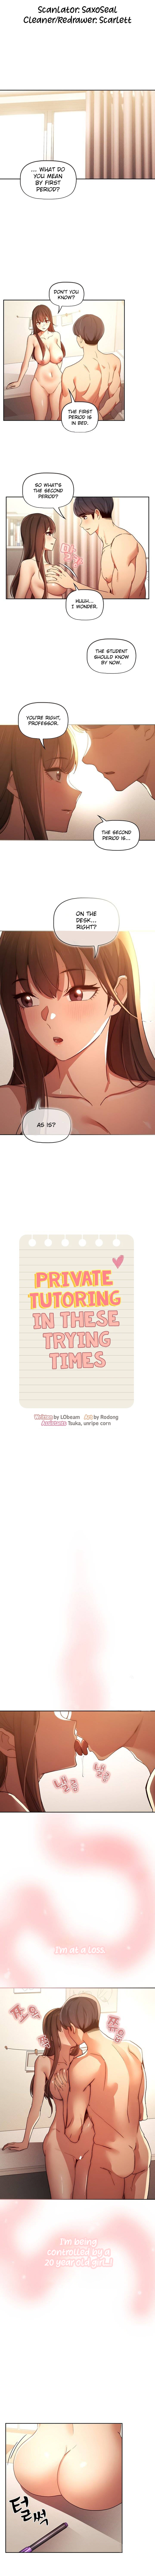 private-tutoring-in-these-difficult-times-chap-32-0